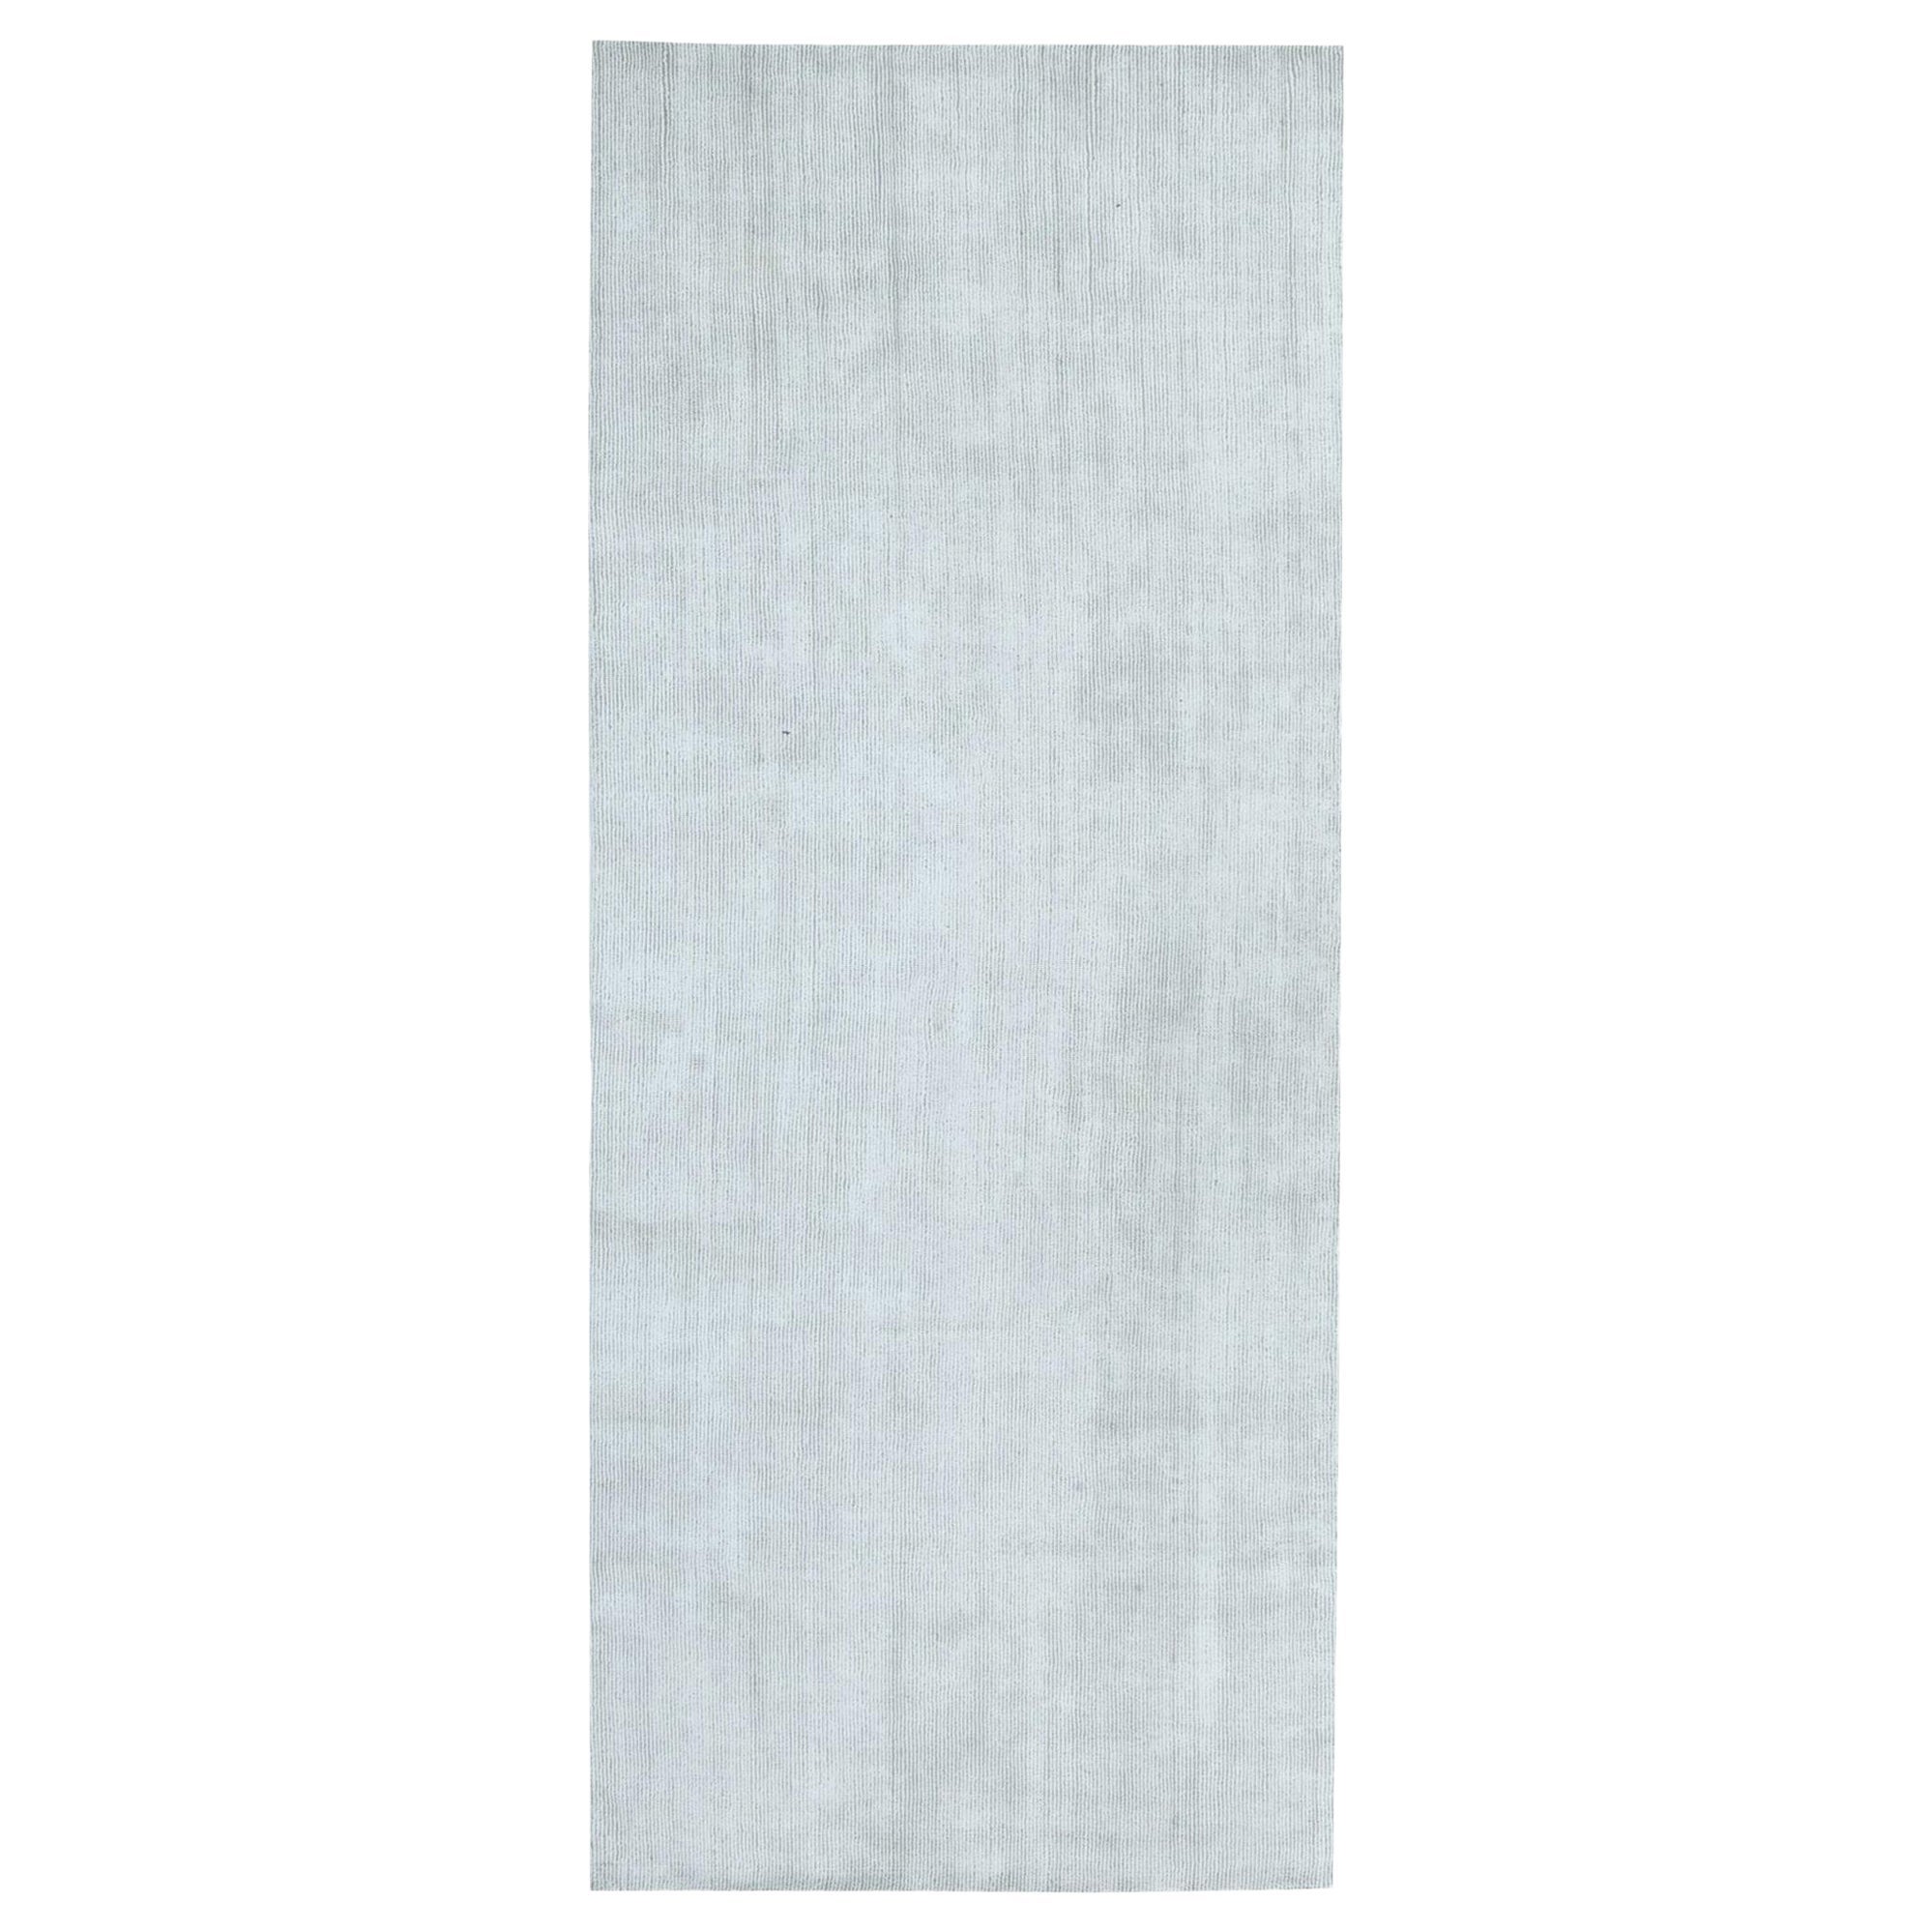 Contemporary Solid White, Beige and Grey Handmade Wool Rug by Doris Leslie Blau For Sale